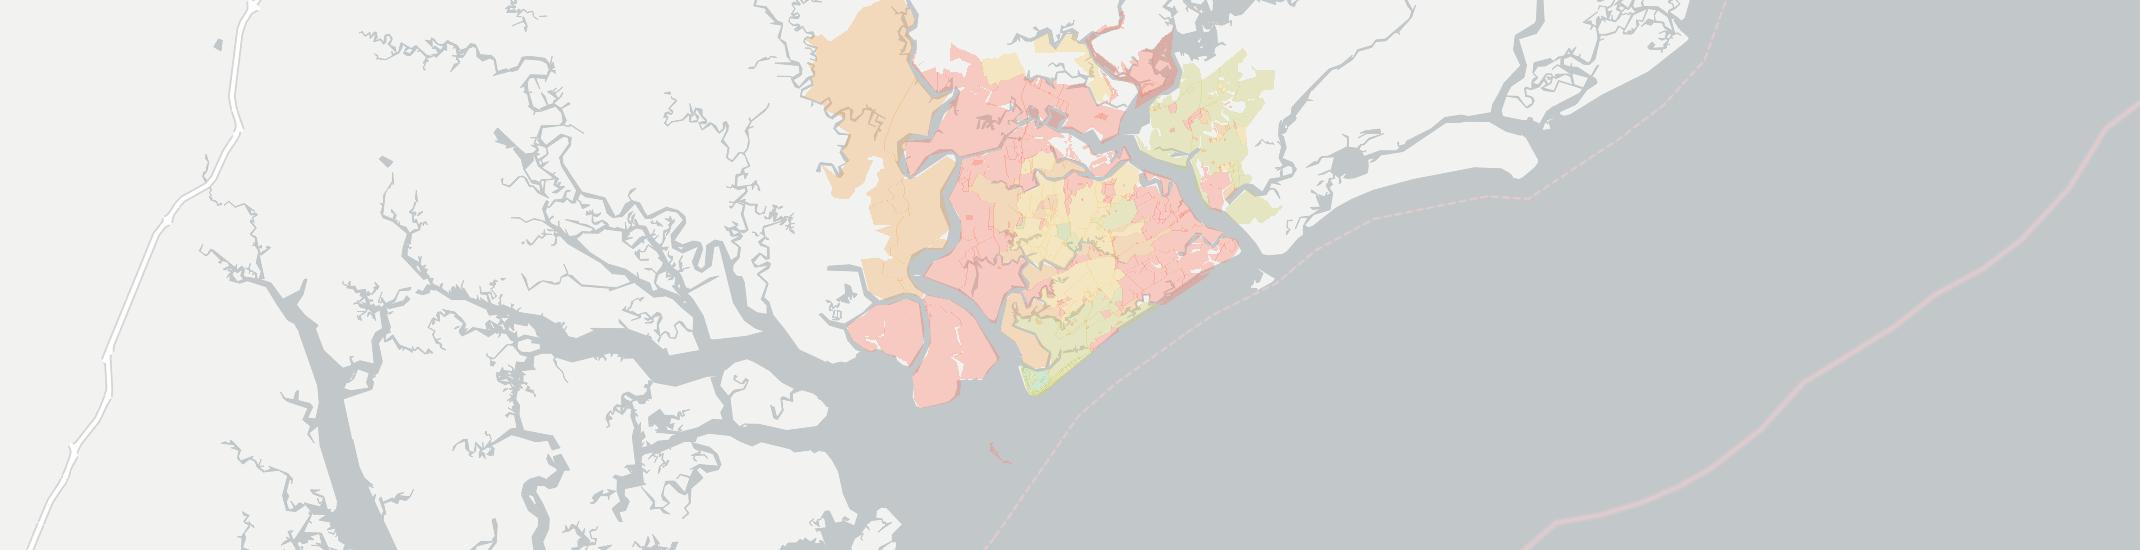 Edisto Island Internet Competition Map. Click for interactive map.